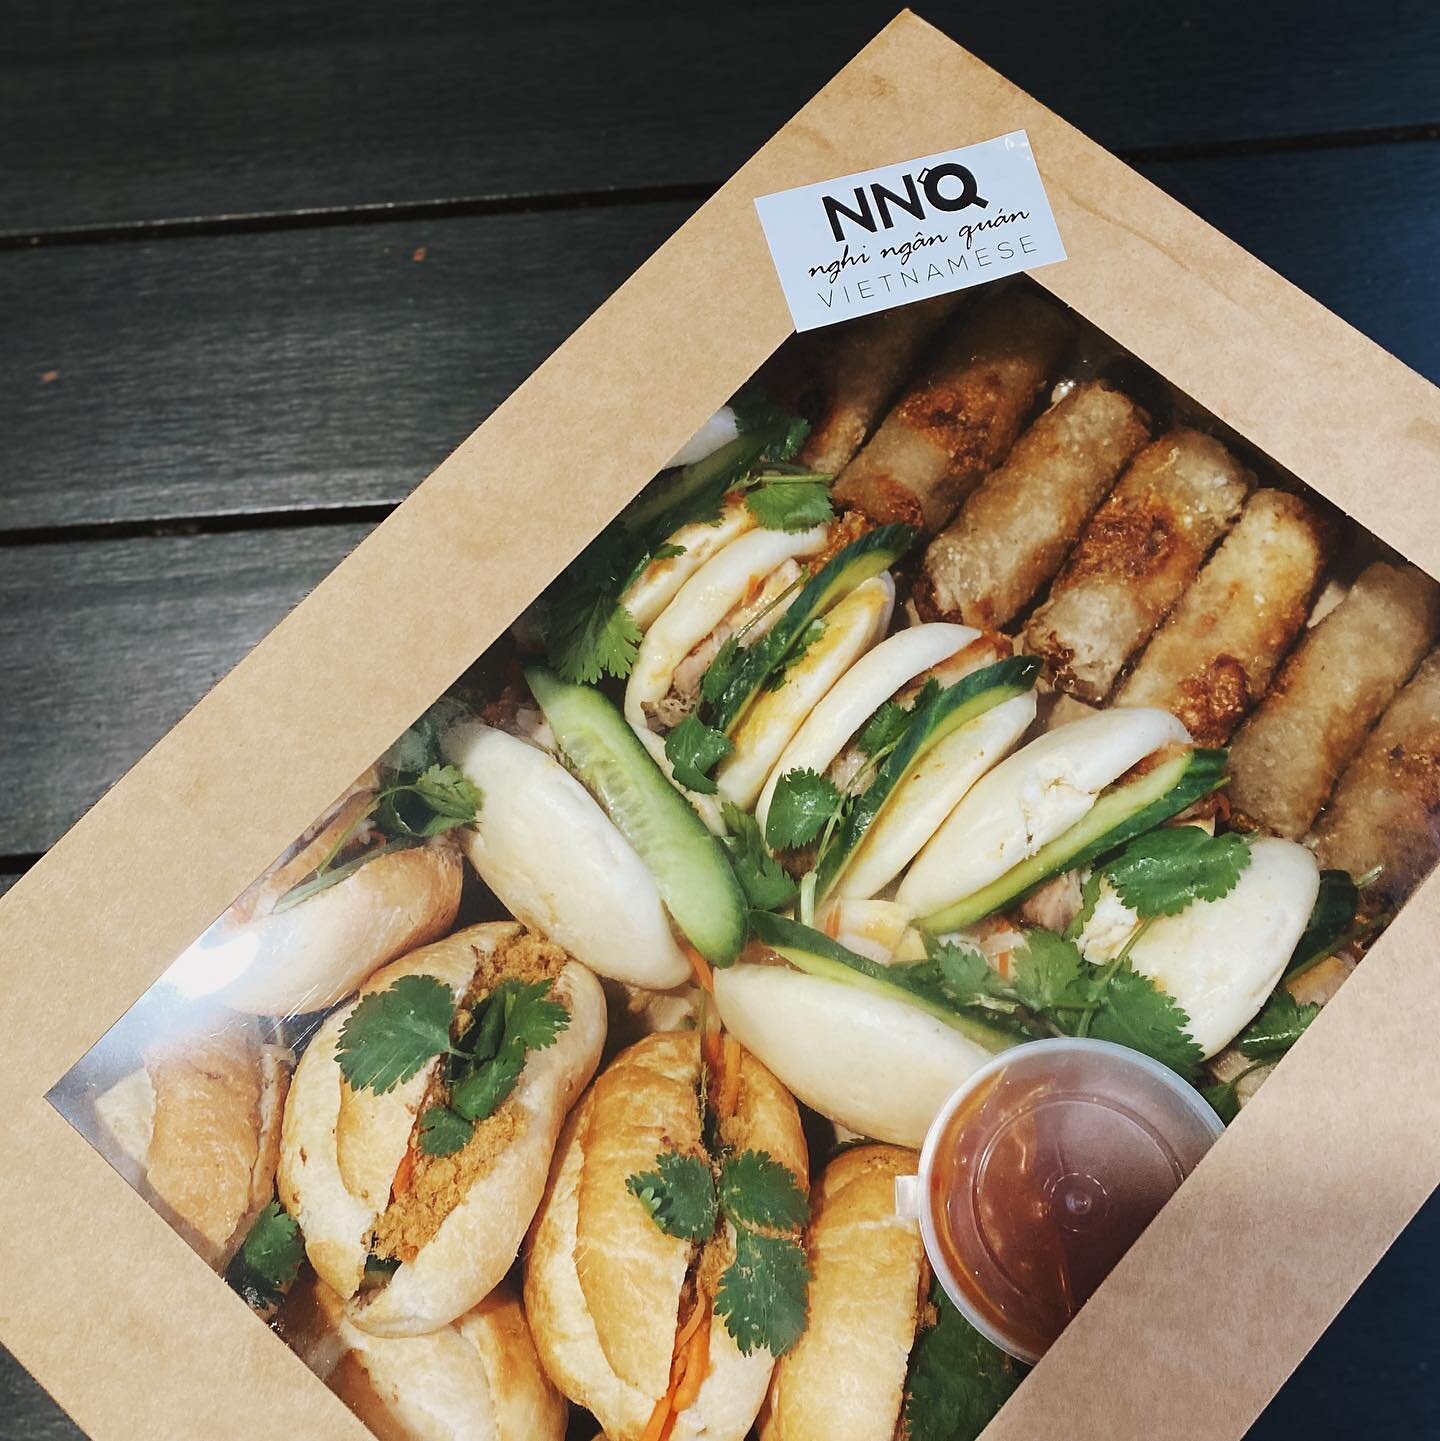 Weekend catchup? Picnic or just a casual gathering? 

We got your back. Our snack box is available for pick up and delivery. Starting from $12 pp. 

Email us at bookings@nnqwoodville.com.au